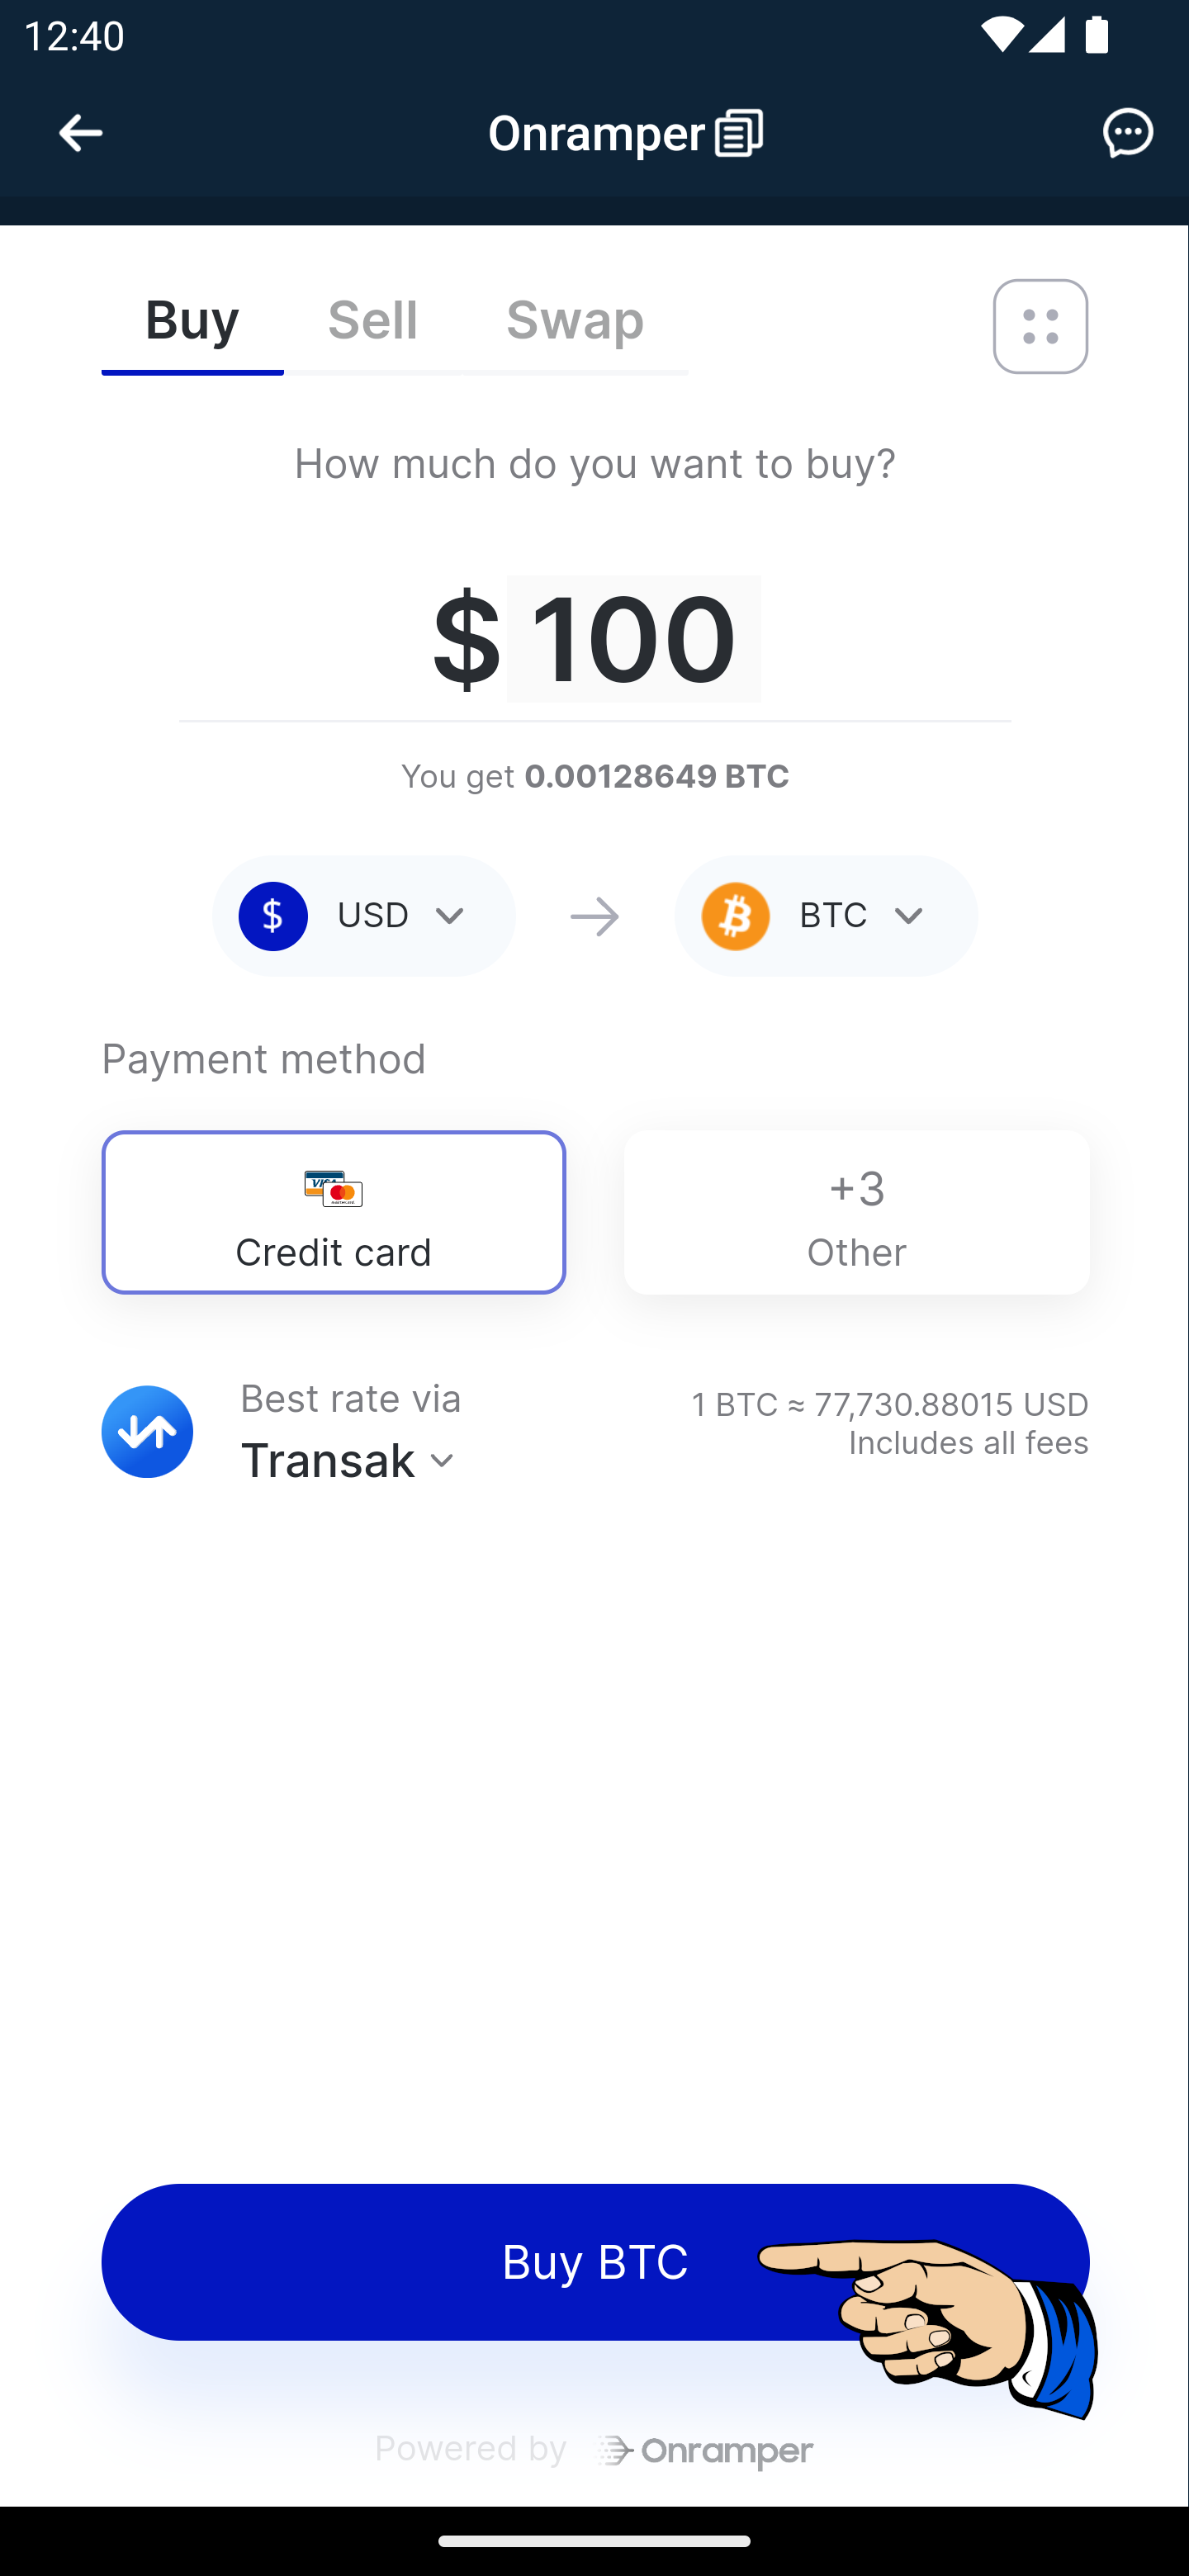 screenshot of 8V app buy crypto with credit card onramper interface with the buy button highlighted